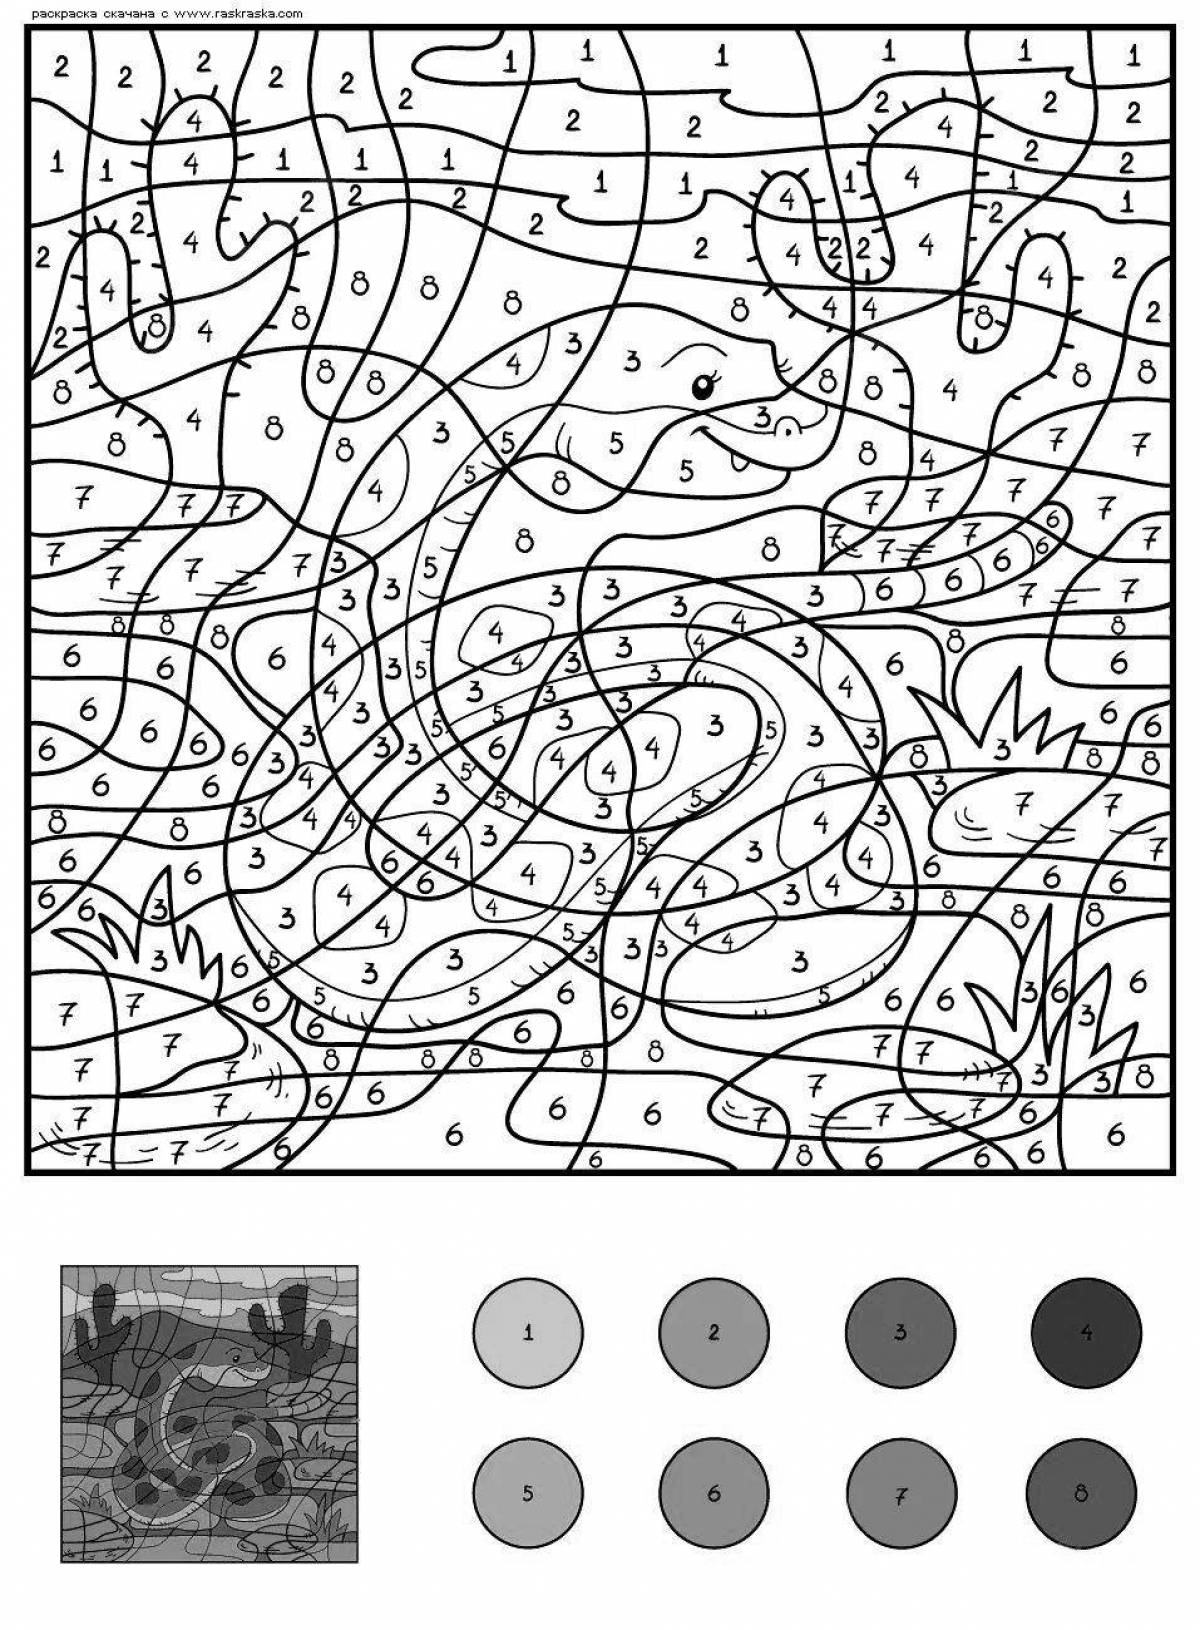 Flawless snake by numbers coloring page